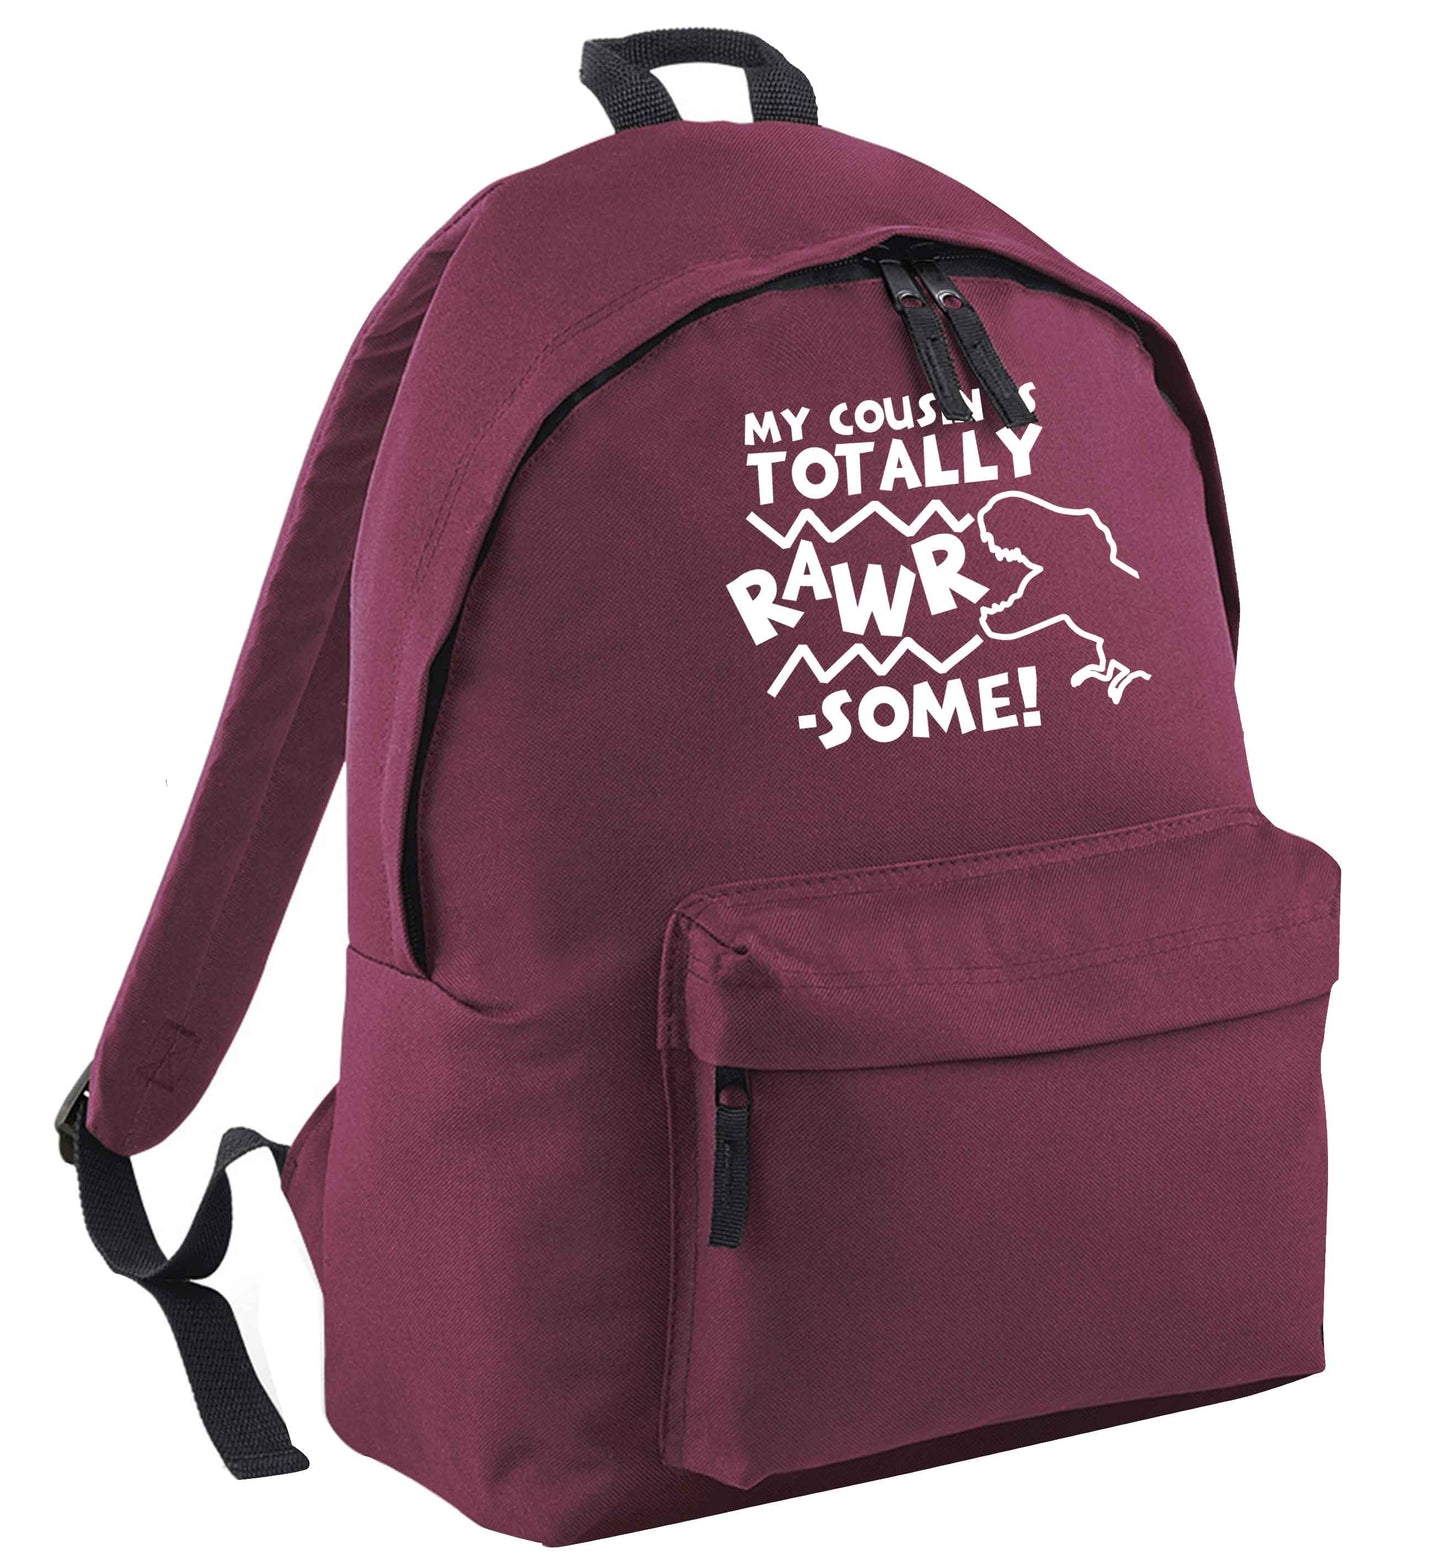 My cousin is totally rawrsome black childrens backpack